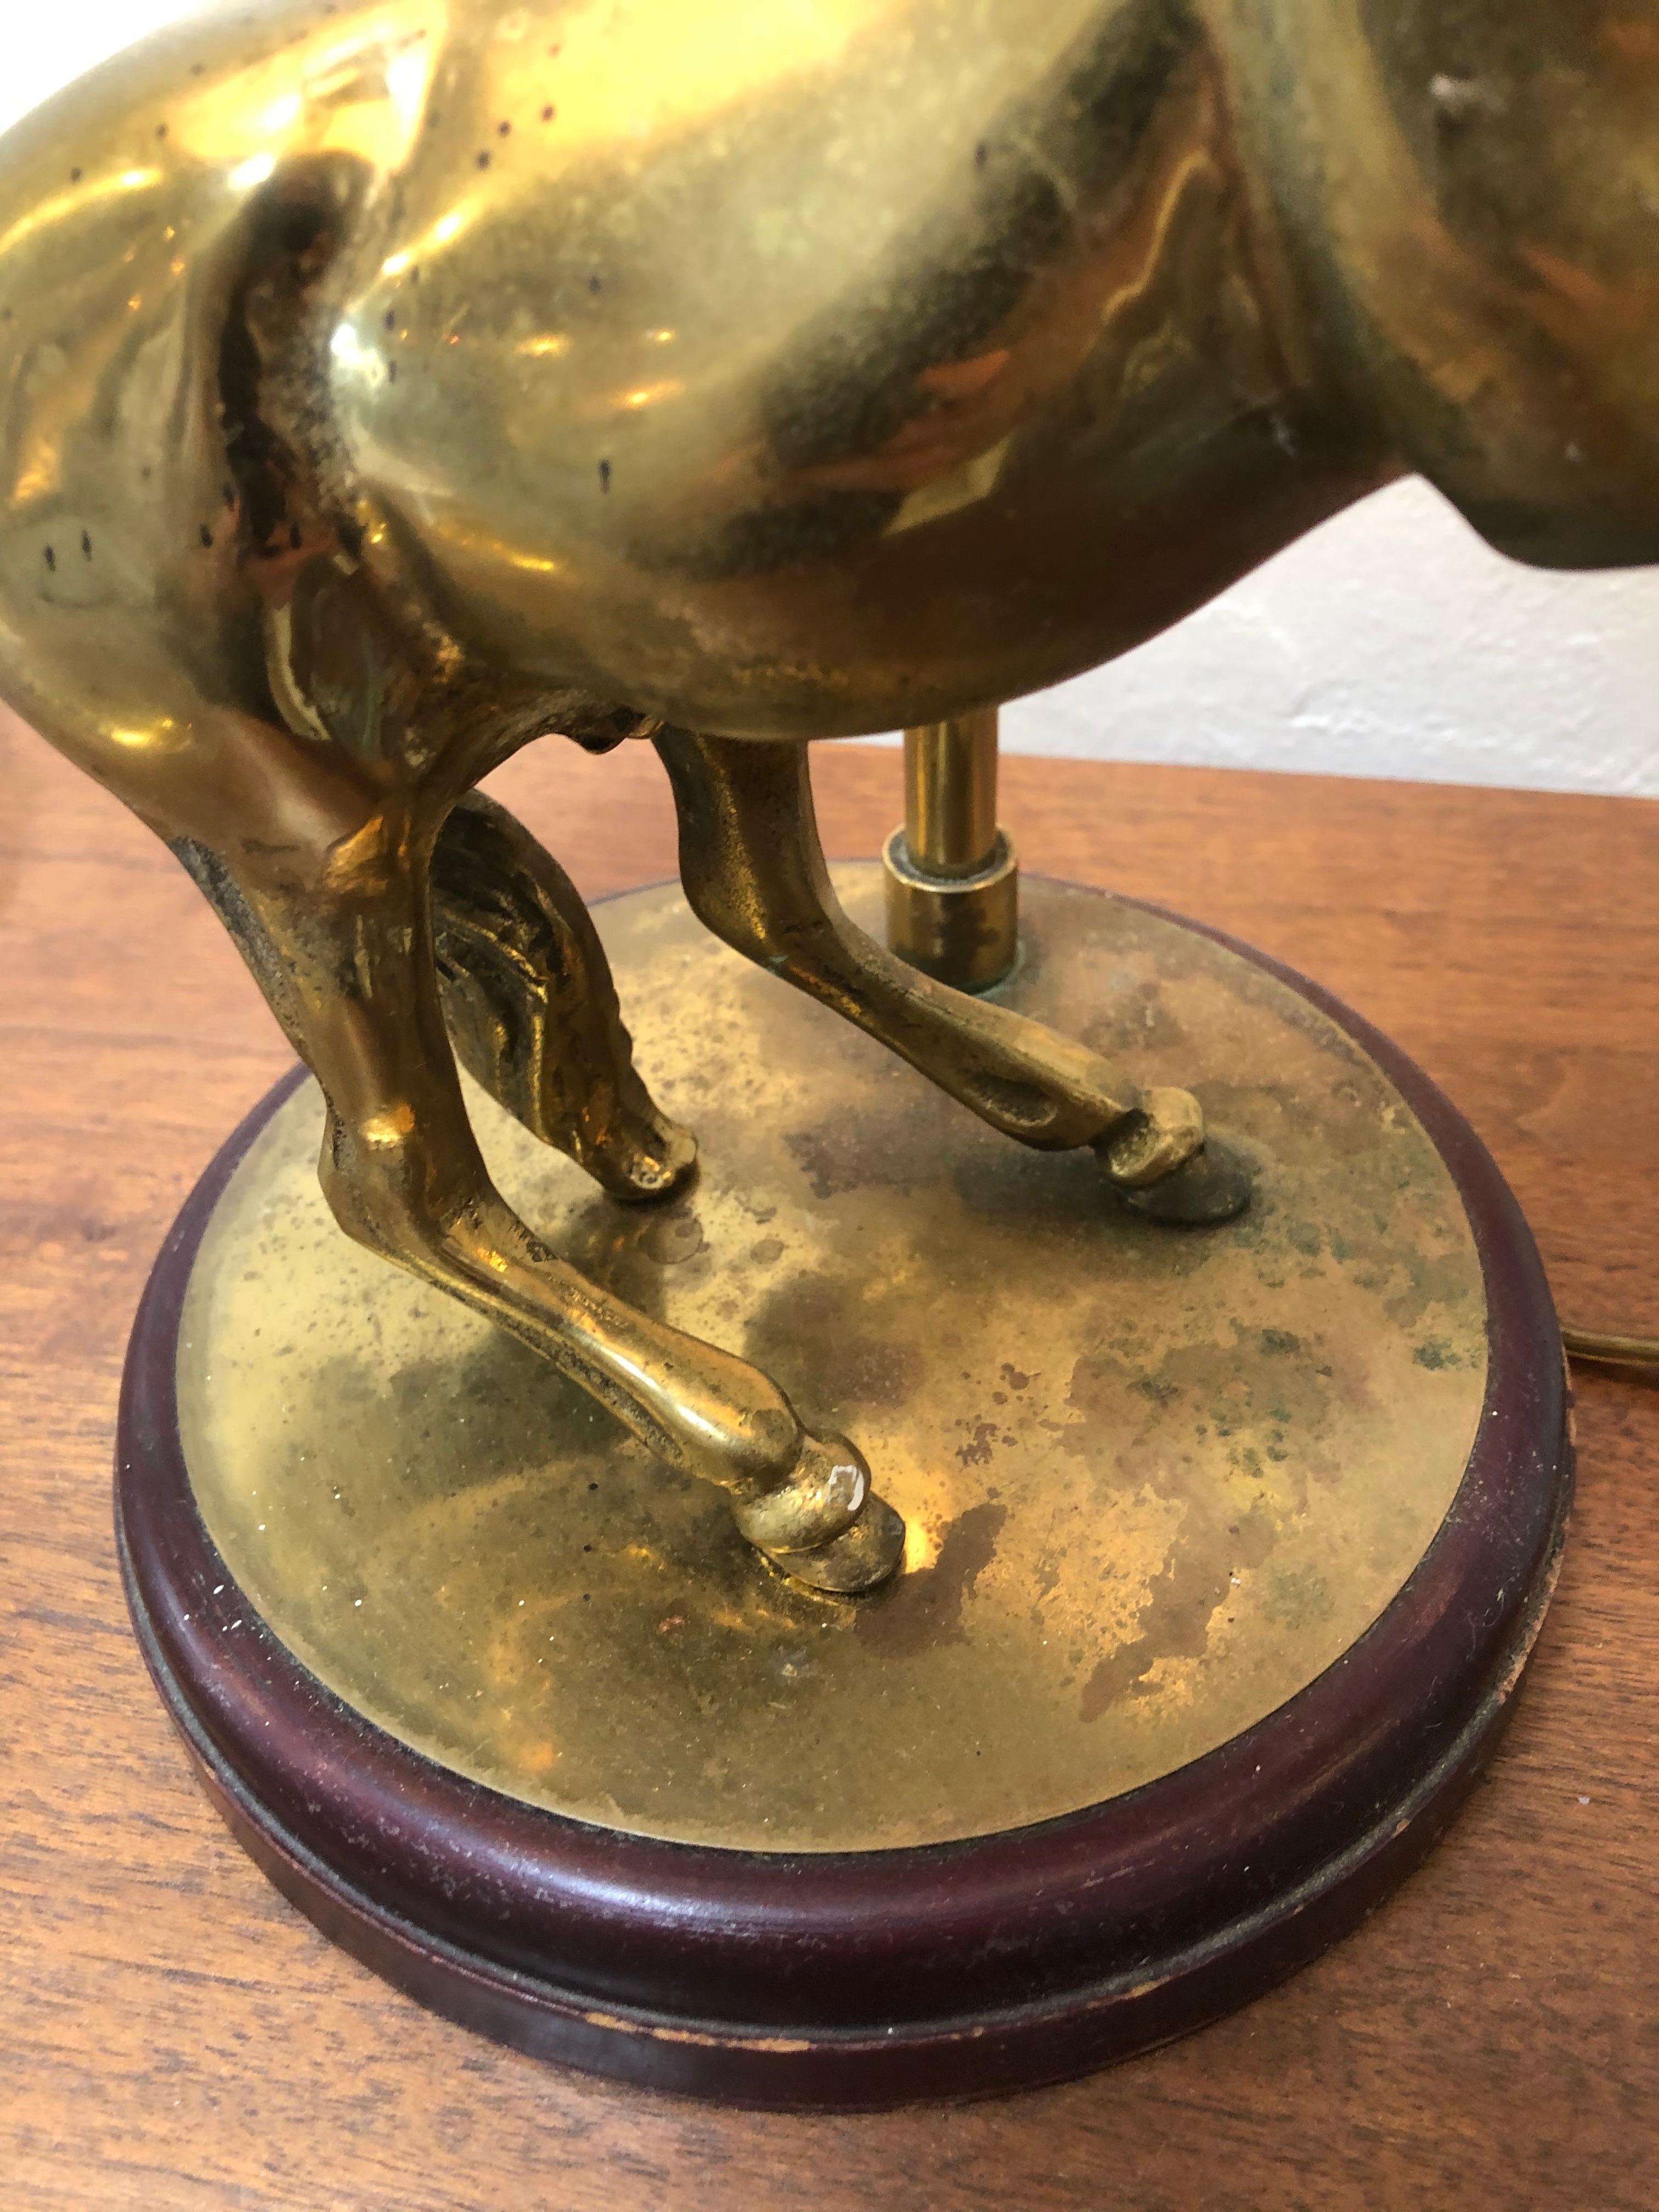 Vintage brass horse lamp fitted with linen lampshade and brass is mounted on wood stand. Lamp also comes with light adjustment switch. Great as an accent piece or desk lamp.